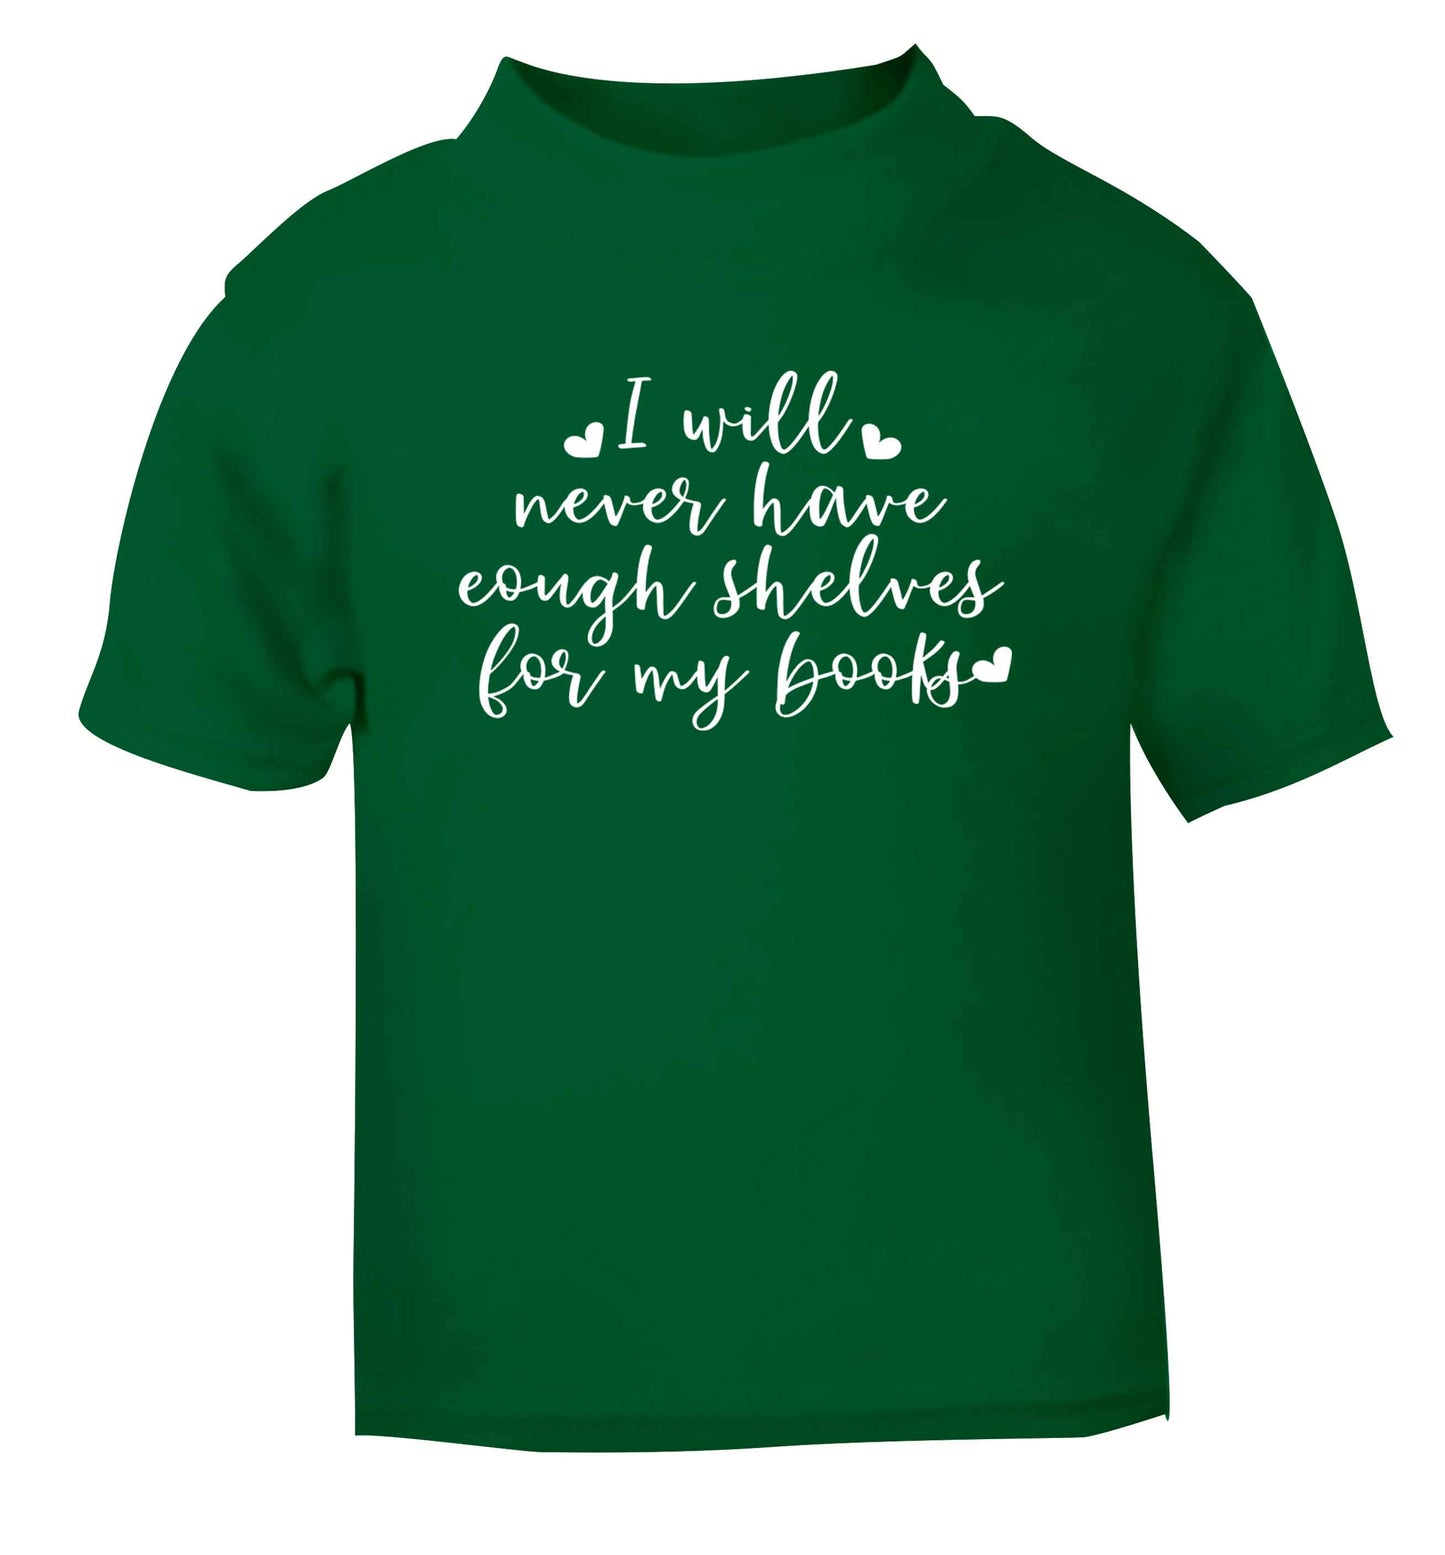 I will never have enough shelves for my books green Baby Toddler Tshirt 2 Years